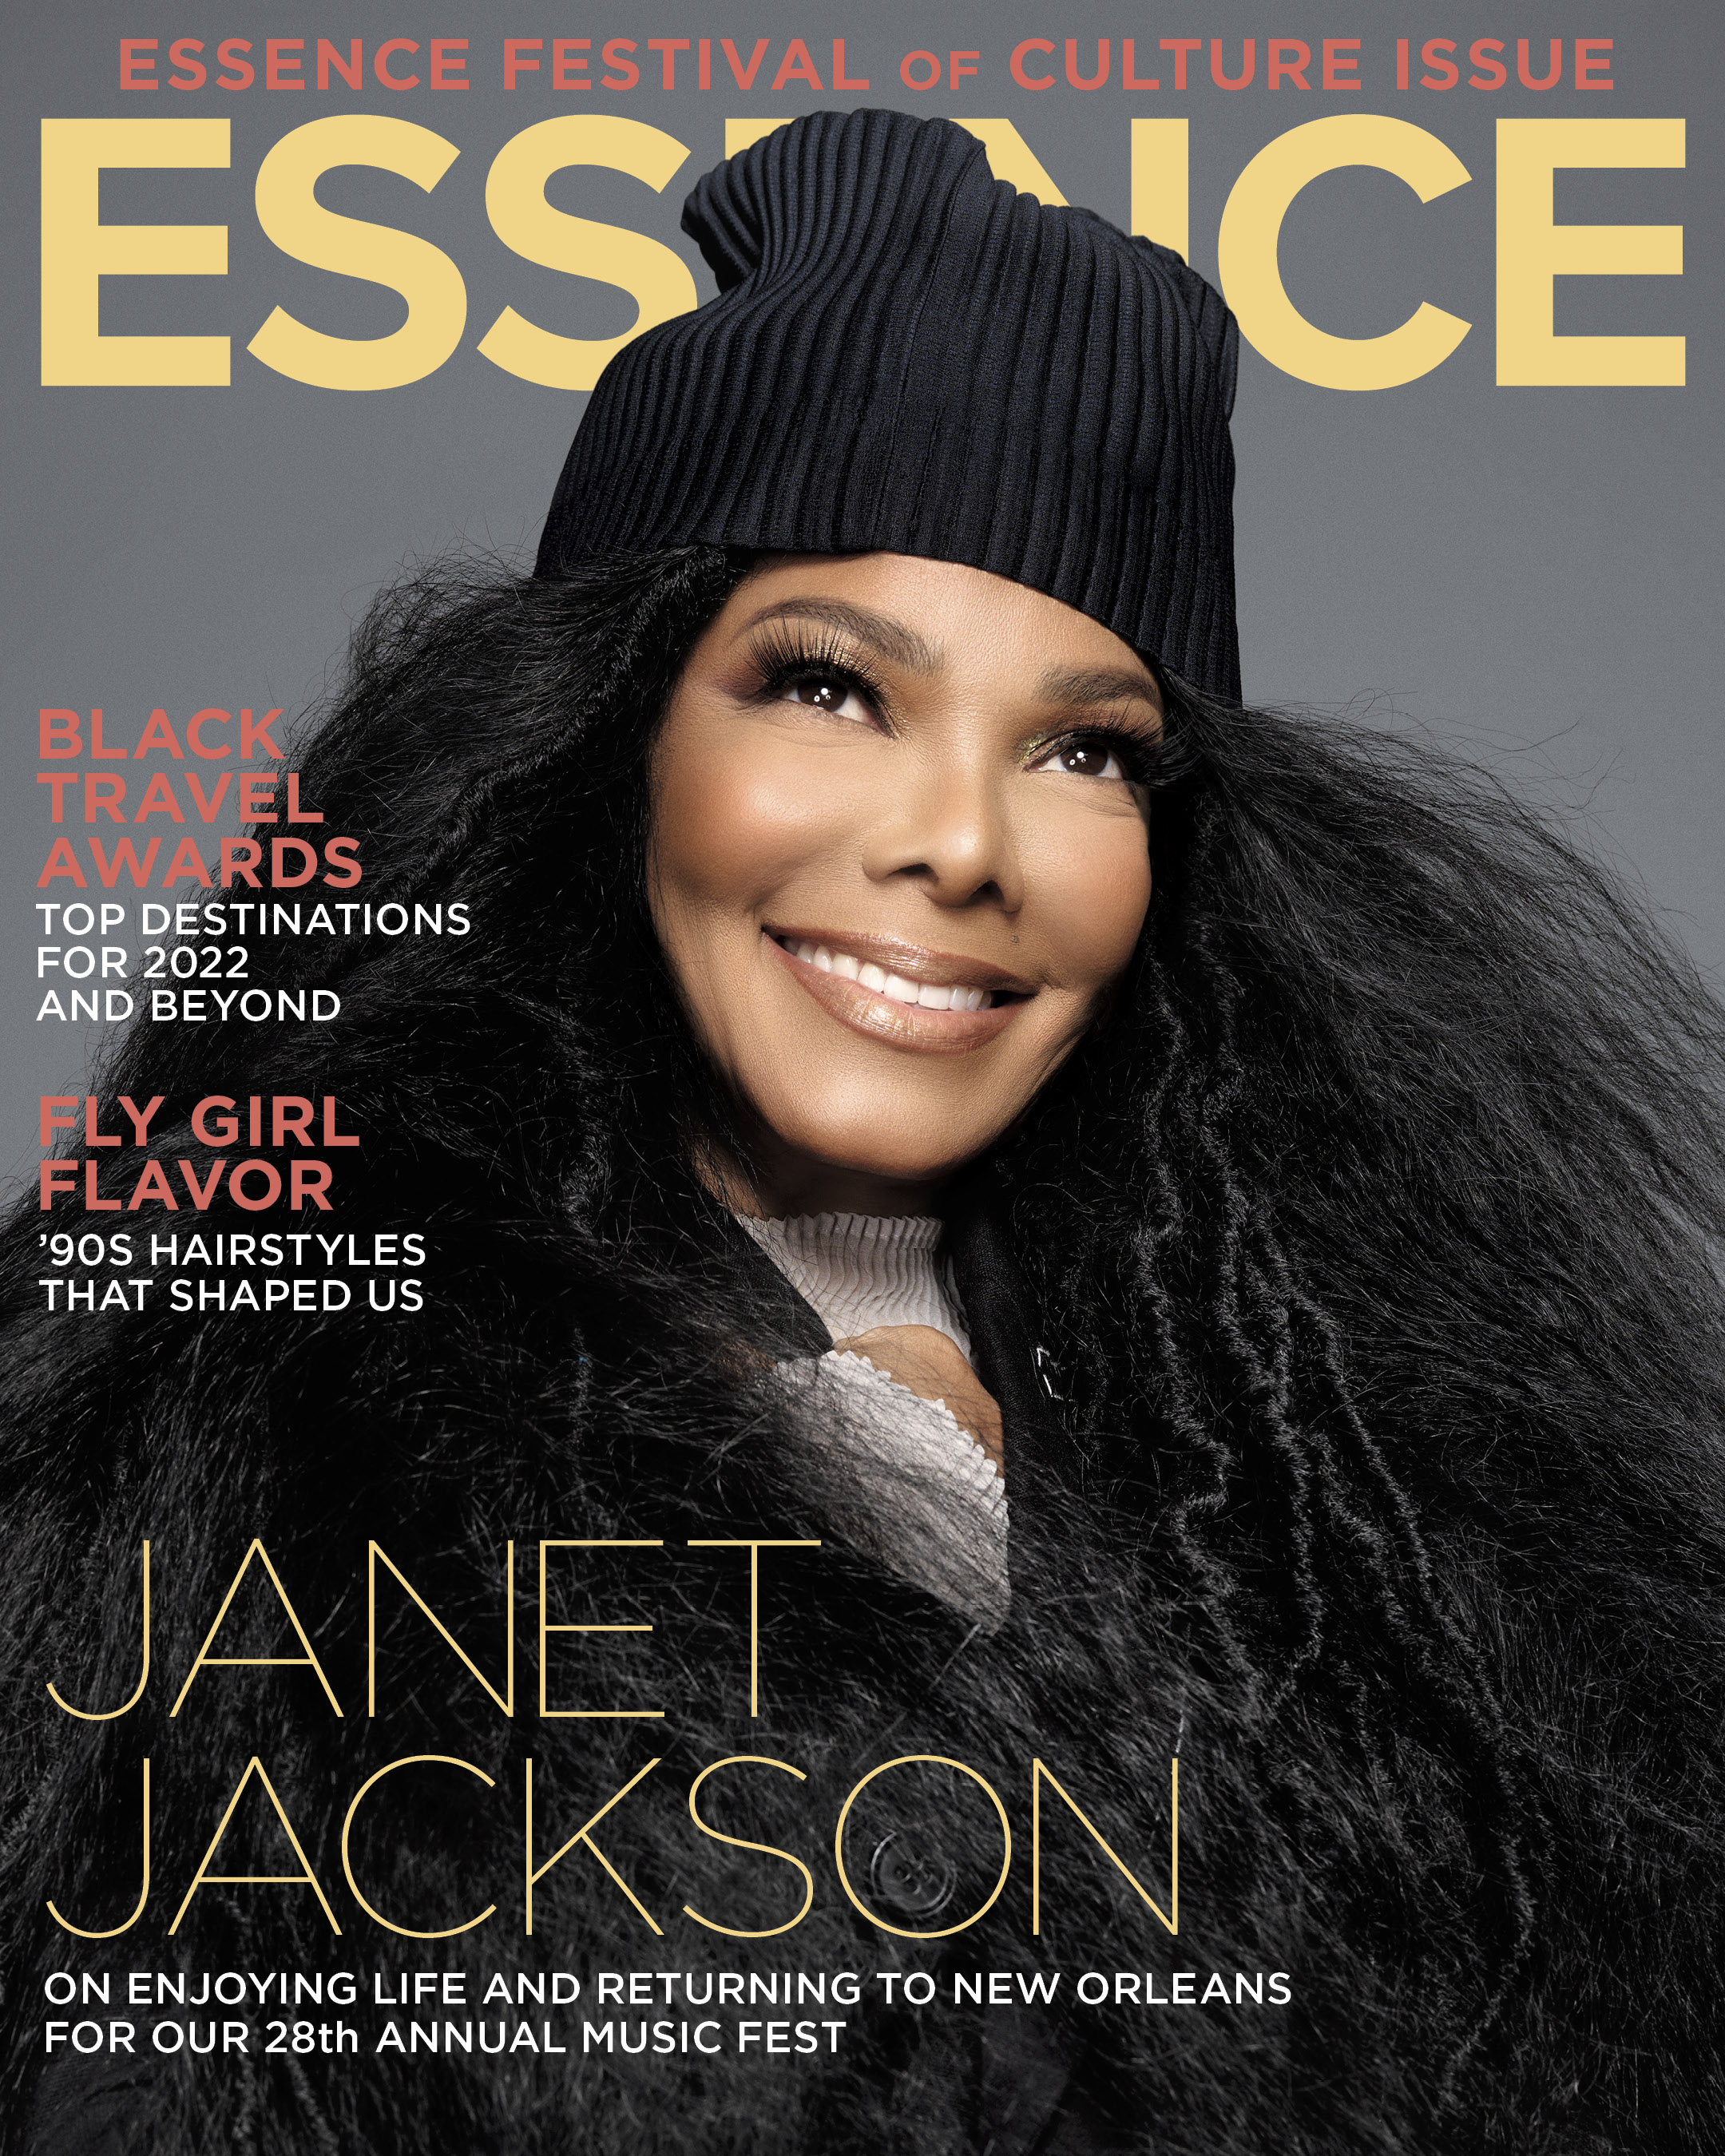 Rhythm Baetion Janet Jackson Covers Essence Opens Up About Motherhood And Music—‘i Love It Too